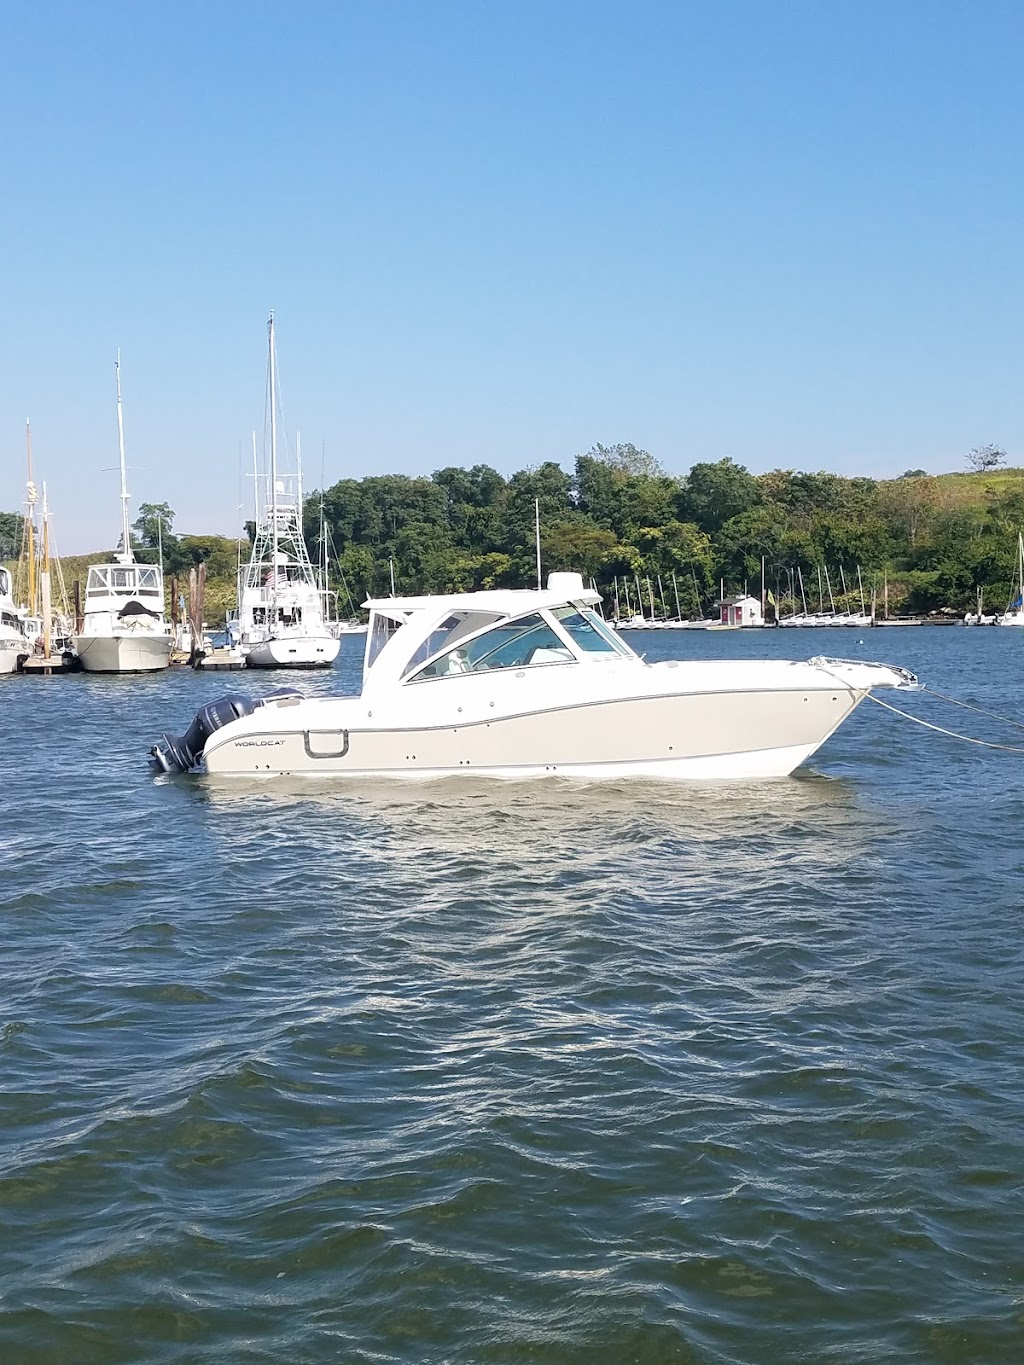 Twin Hull Boats | 135 Bywater Ln, Bridgeport, CT 06605 | Phone: (203) 330-8946